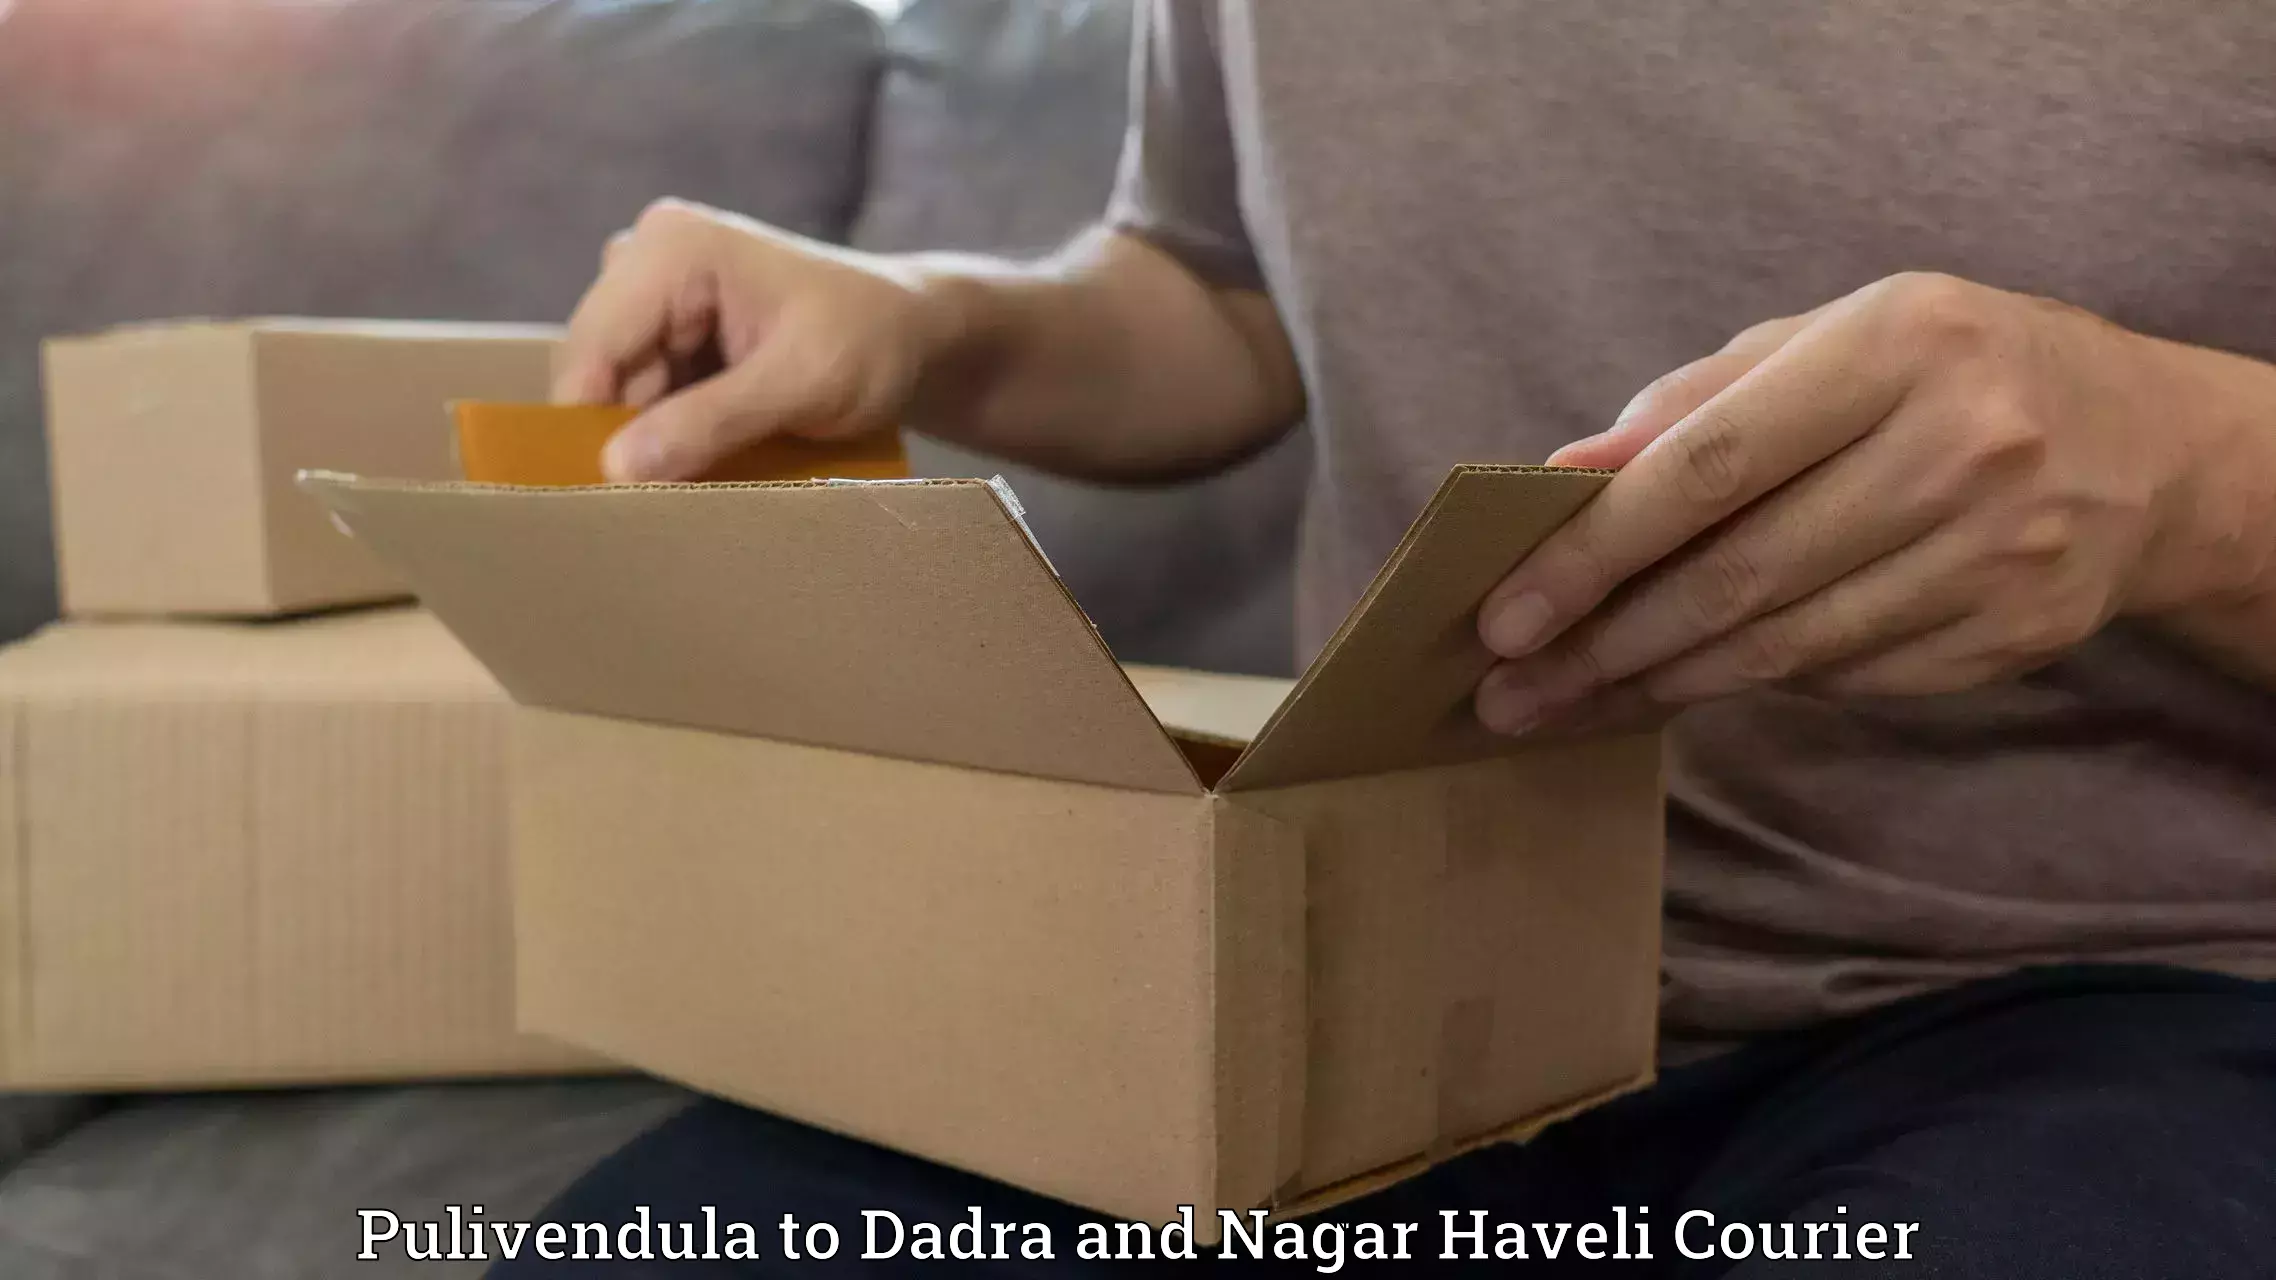 Express package delivery in Pulivendula to Dadra and Nagar Haveli